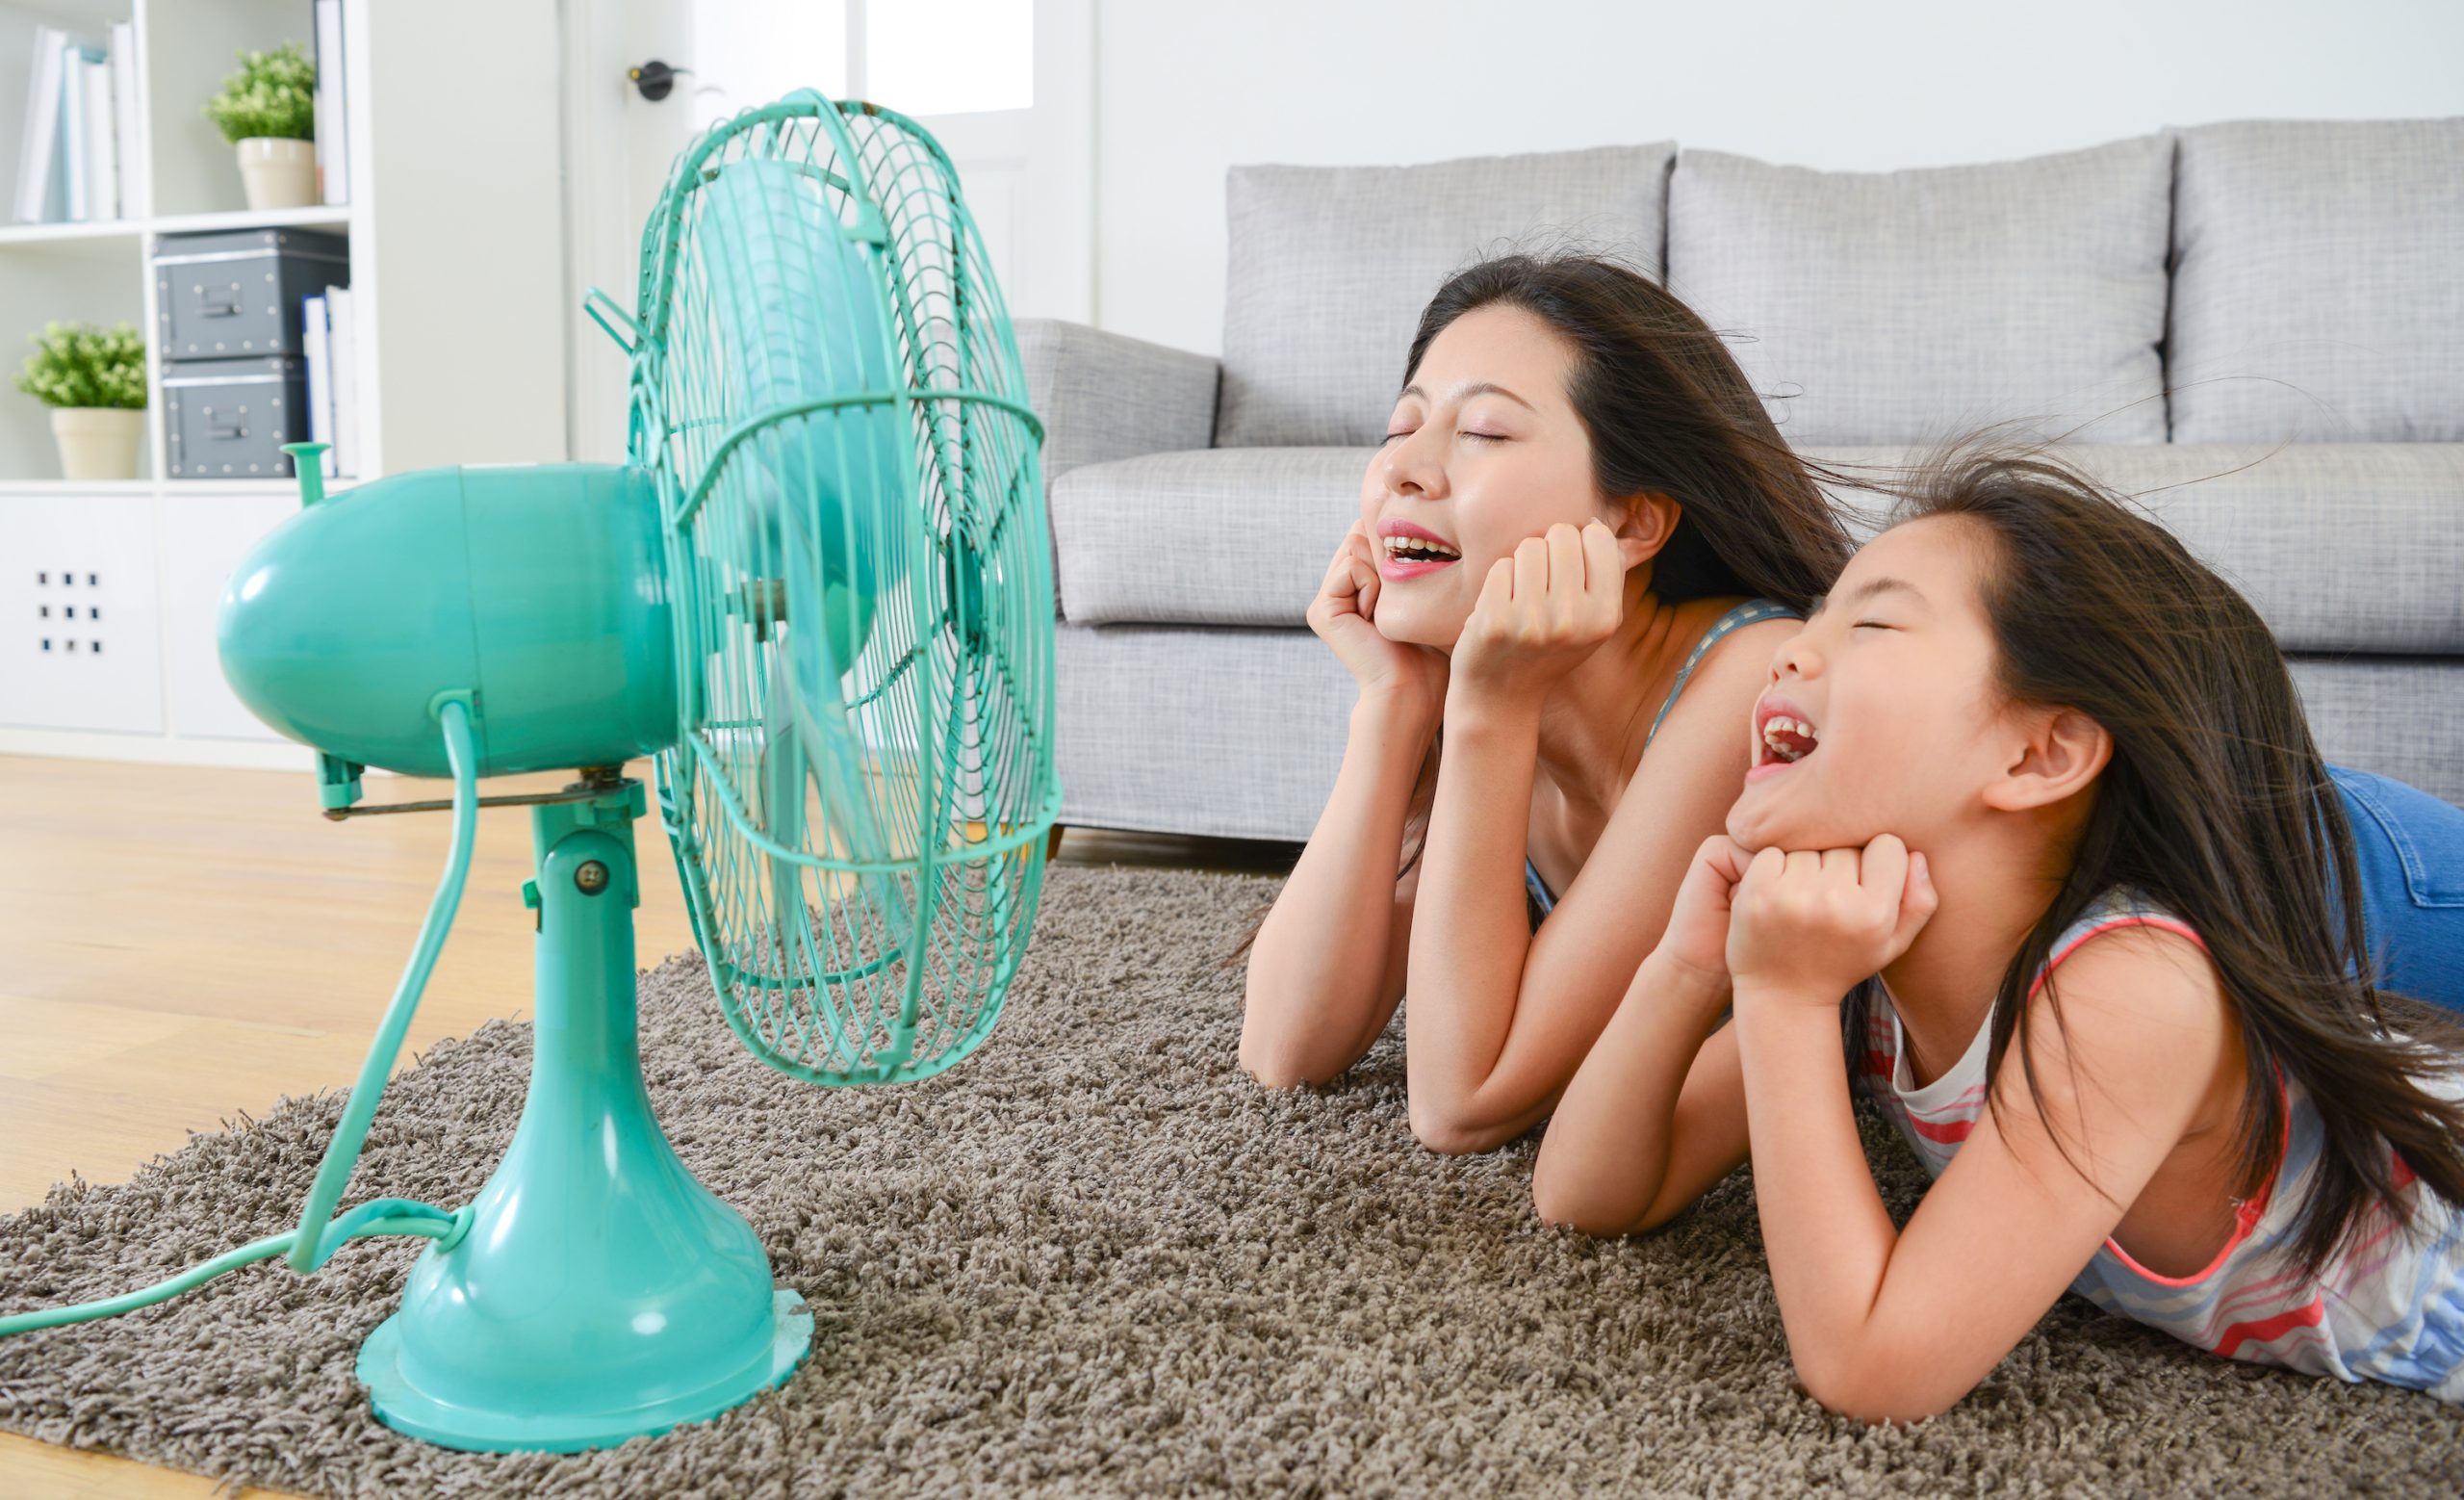 Stay Cool & Save: 22 Energy-Saving Tips to Beat the Melbourne Heat